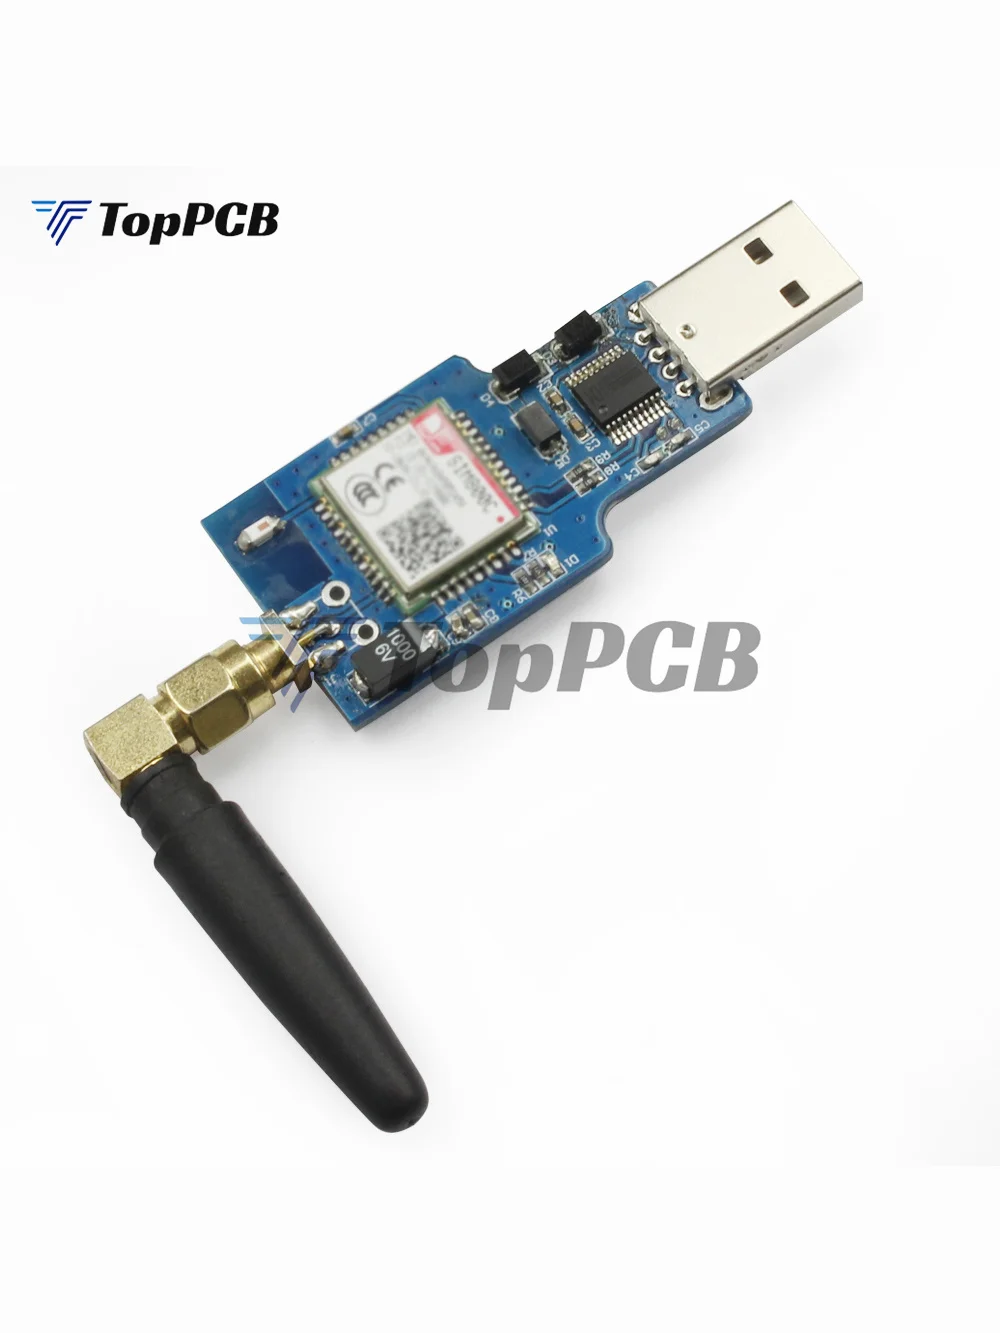 

USB to GSM Module Quad-band GSM GPRS SIM800 SIM800C Module for Wifi Wireless Bluetooth-compatible SMS Messaging With Antenna